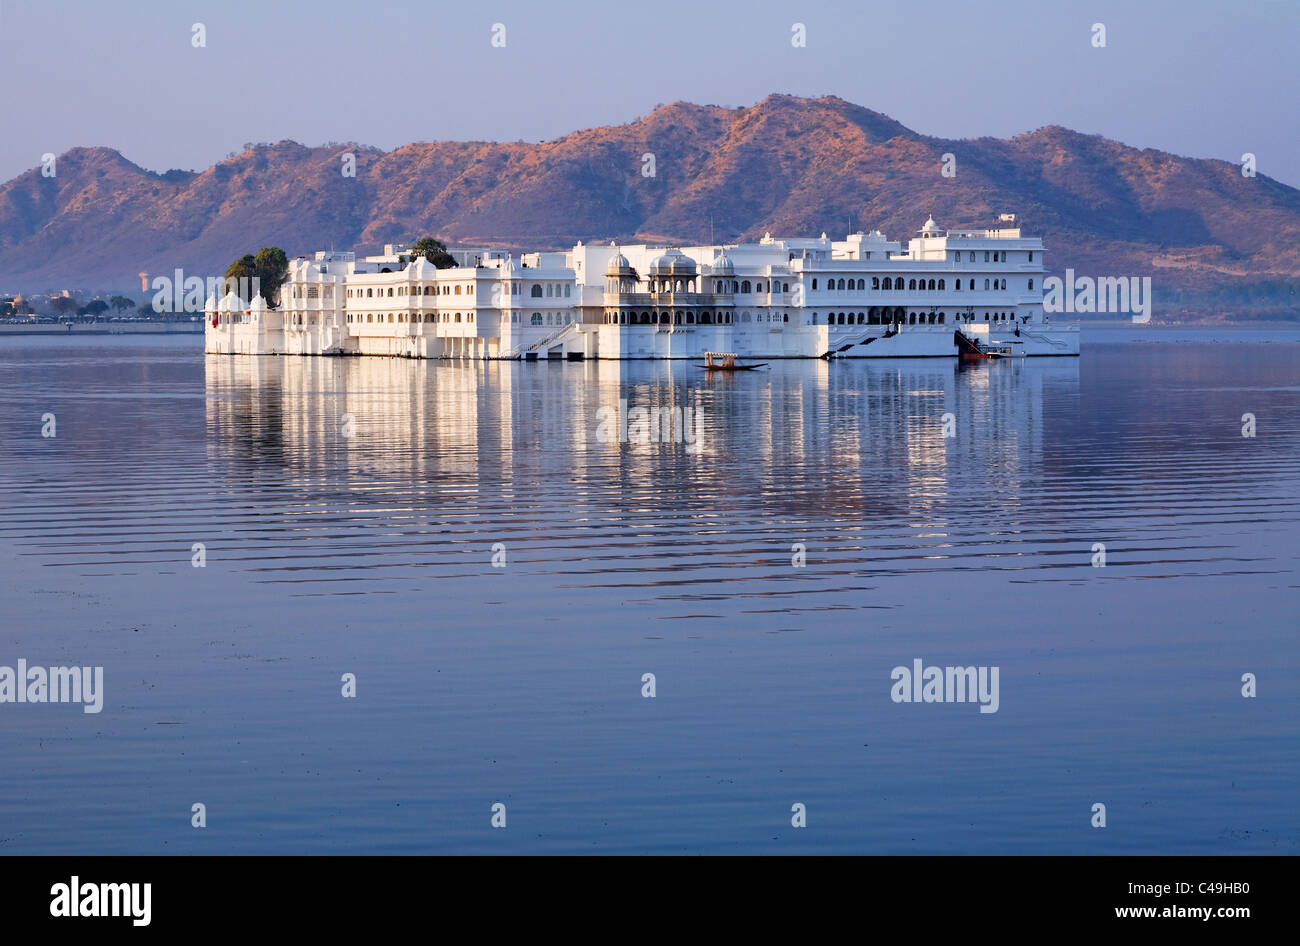 India - Rajasthan - Udaipur - the Lake Palace Hotel in the middle of Lake Pichola Stock Photo